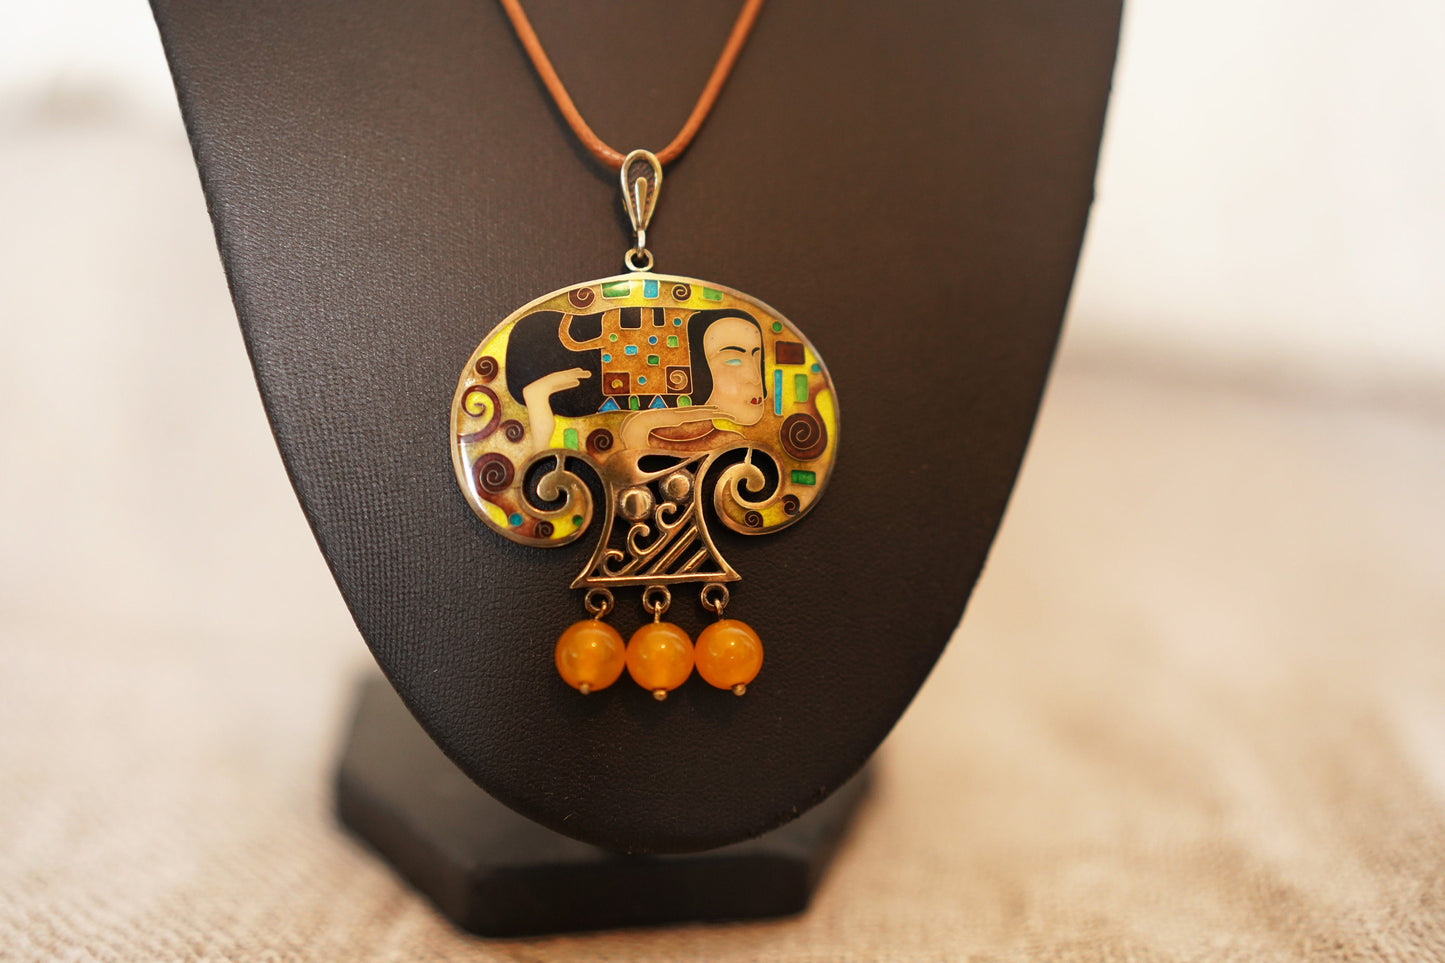 Princess - Handmade Silver Pendant with Cloisonné Enamel and Natural Amber Beads Inspired by Gustav Klimt's Art